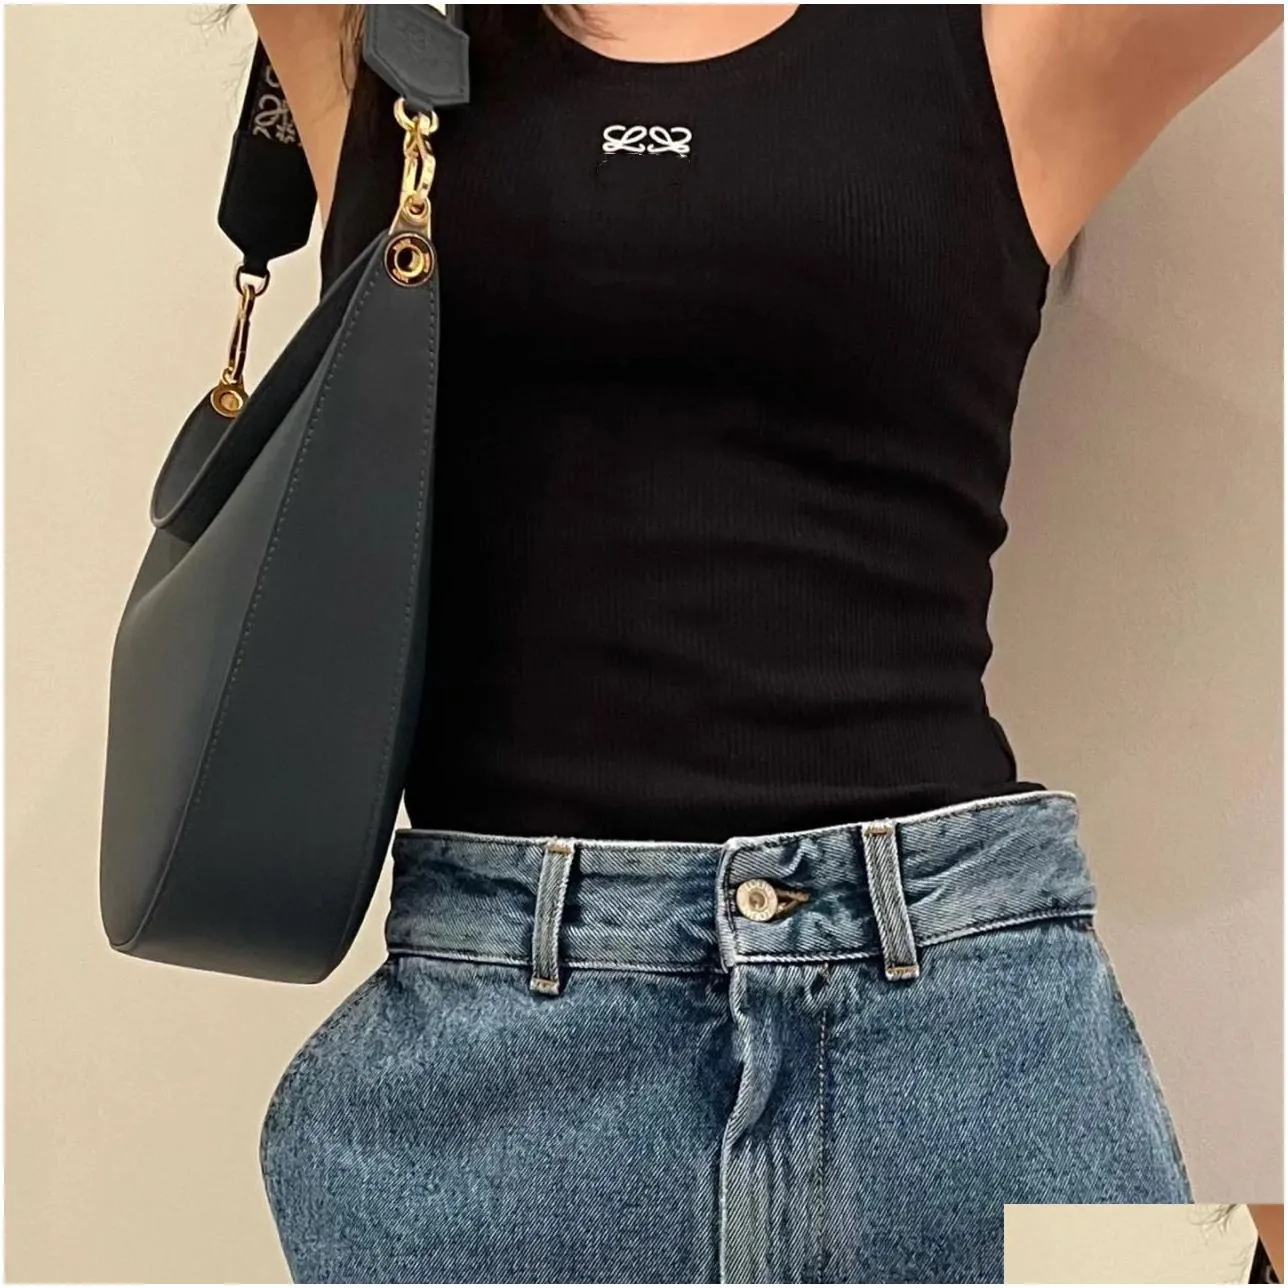 Embroidery Logo Tank Top Summer Short Slim Navel exposed outfit Elastic Sports Knitted Tanks